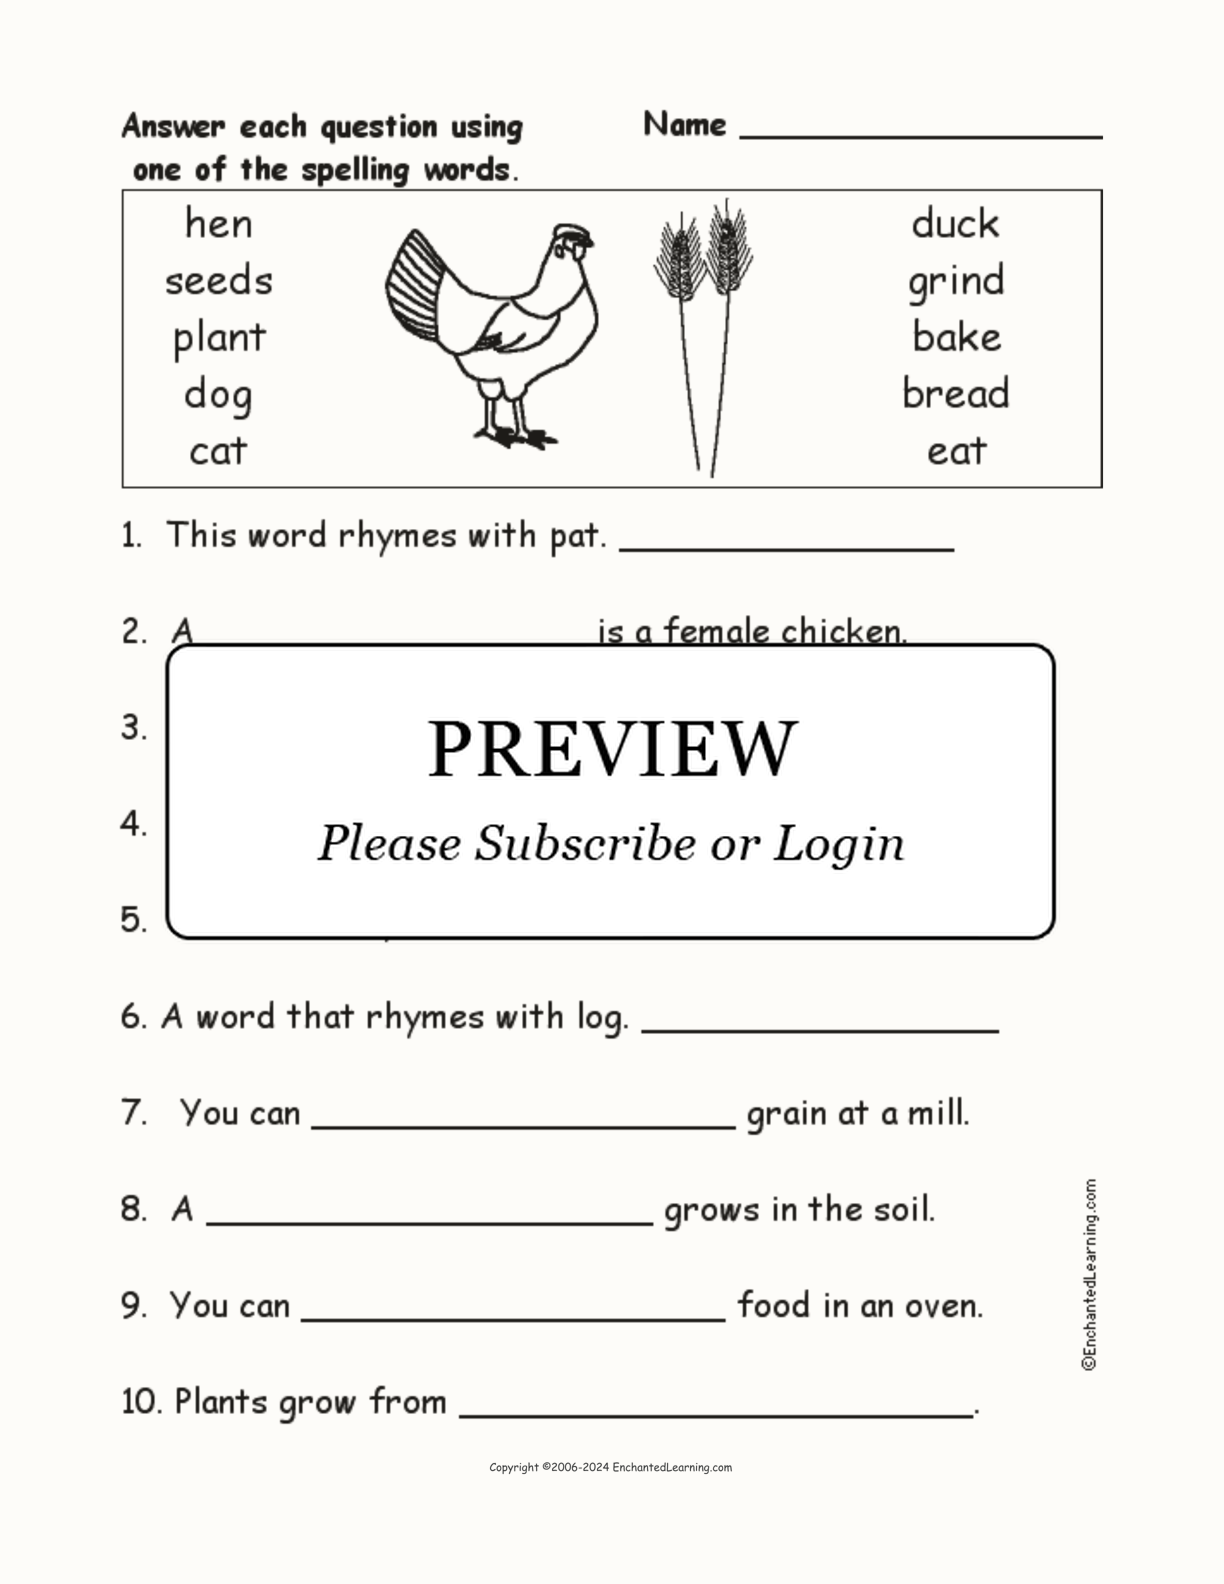 The Little Red Hen: Spelling Word Questions interactive worksheet page 1